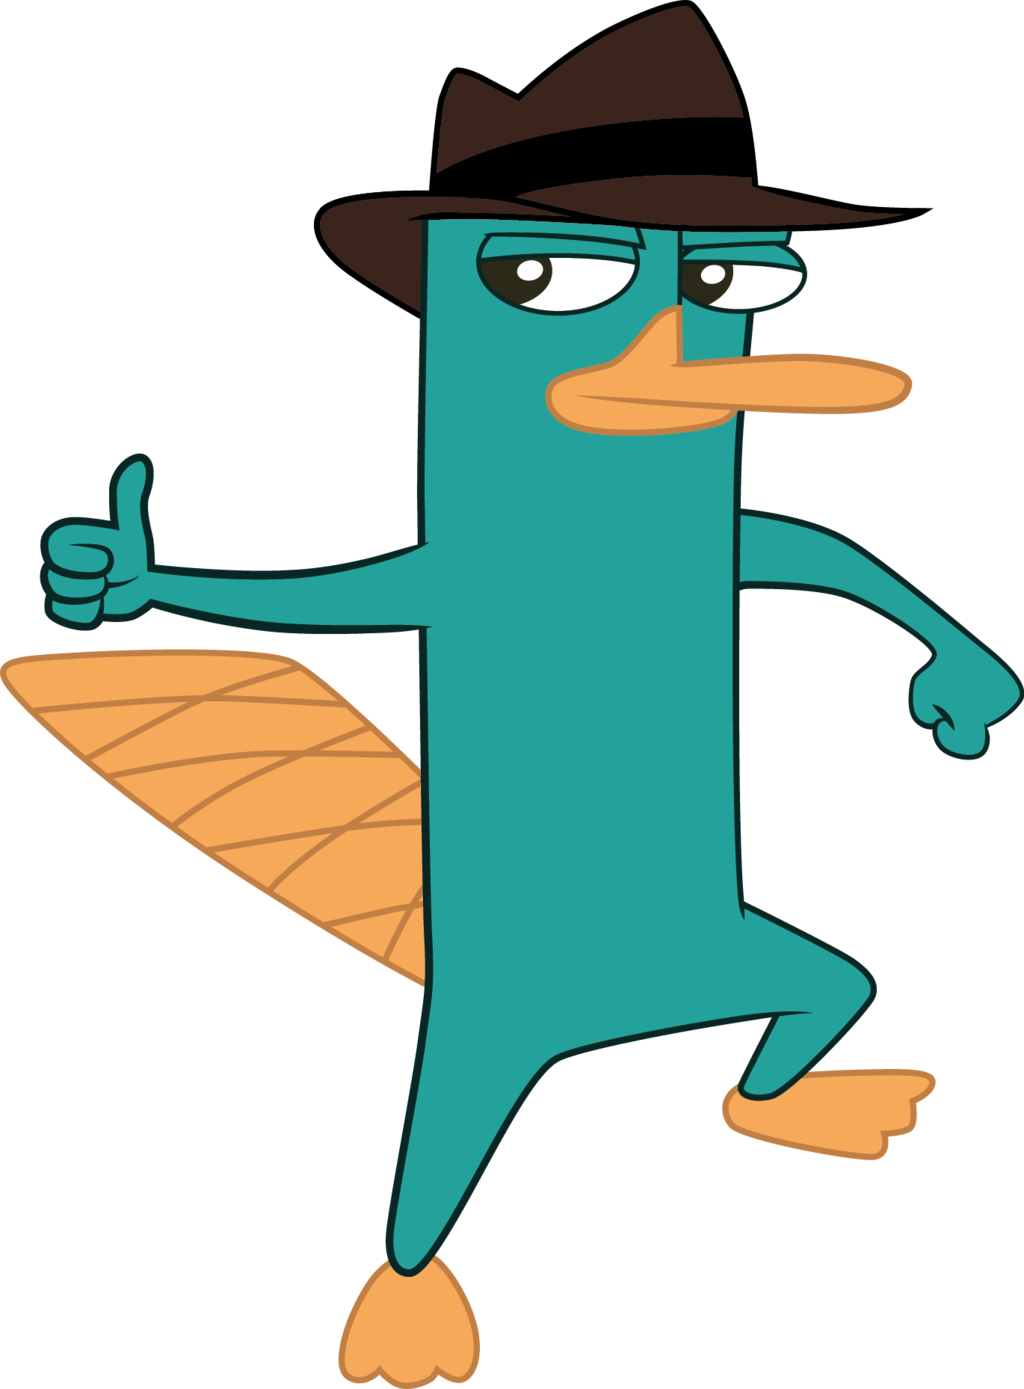 Perry The Platypus Concept Hero Concepts Disney Heroes Battle Mode